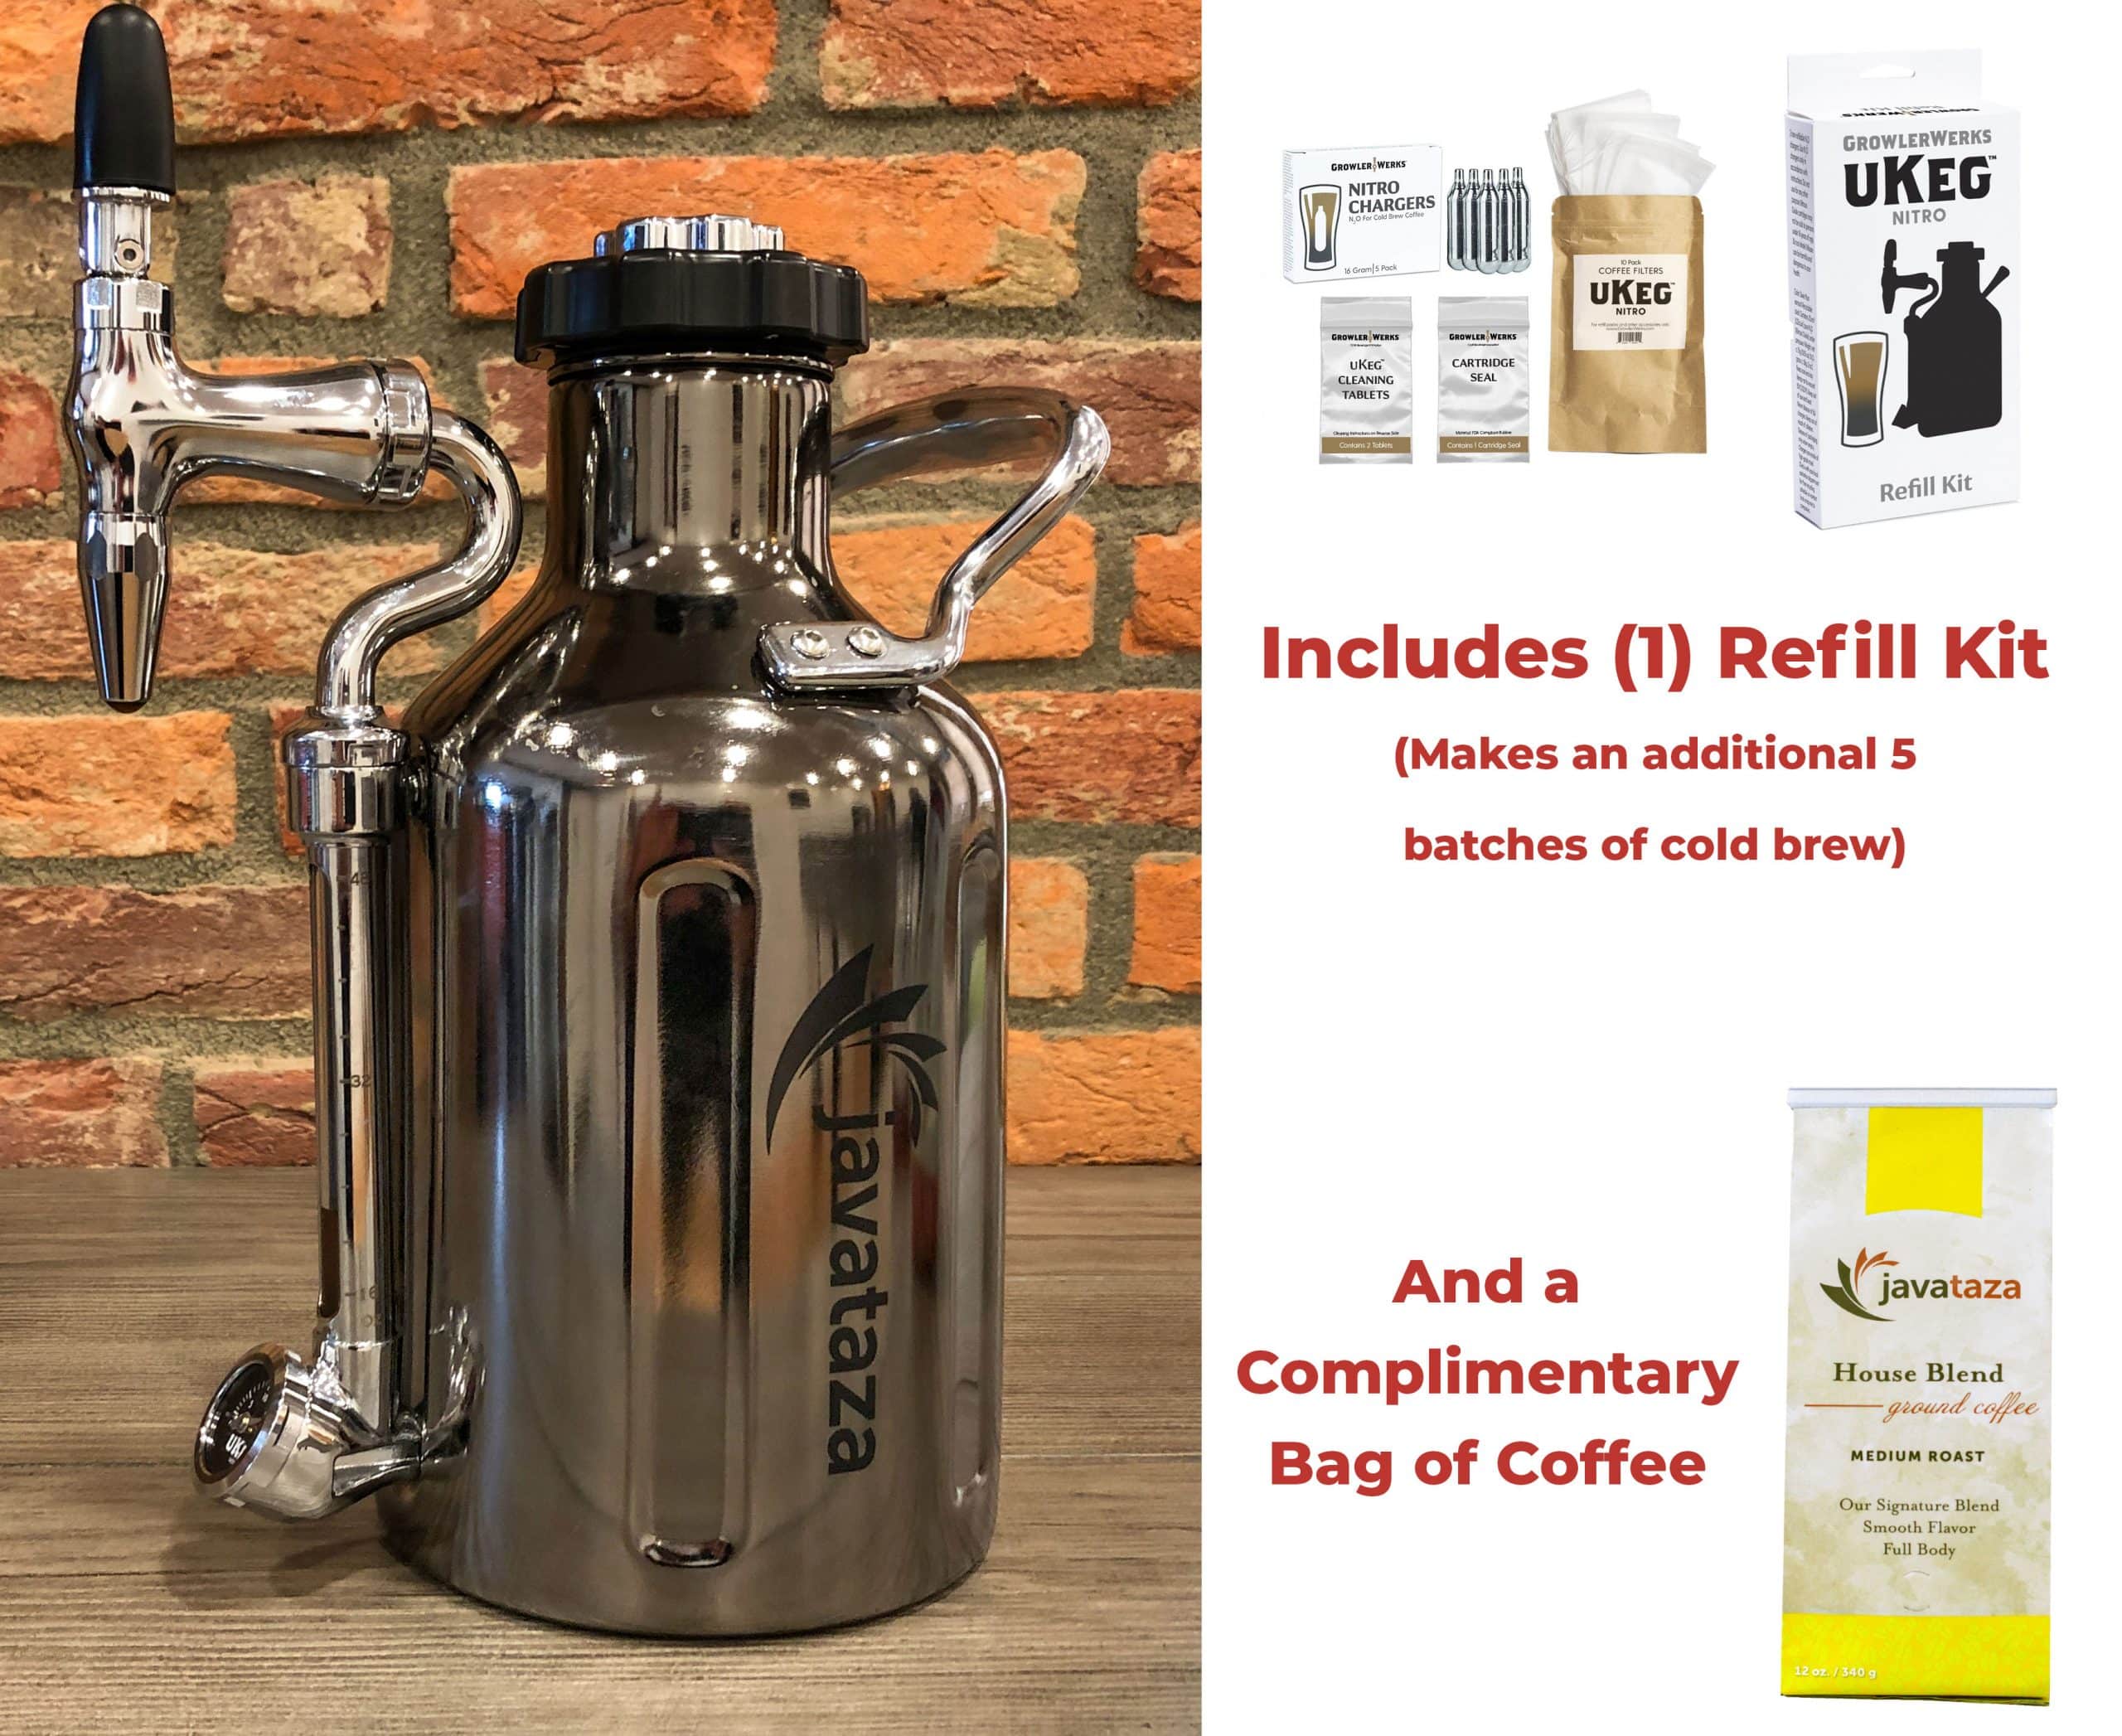 https://javataza.b-cdn.net/wp-content/uploads/buy-coffee/Accessories-Gifts/ukeg-nitro-coffee-cold-brewer-for-home-brewing-1-scaled.jpg